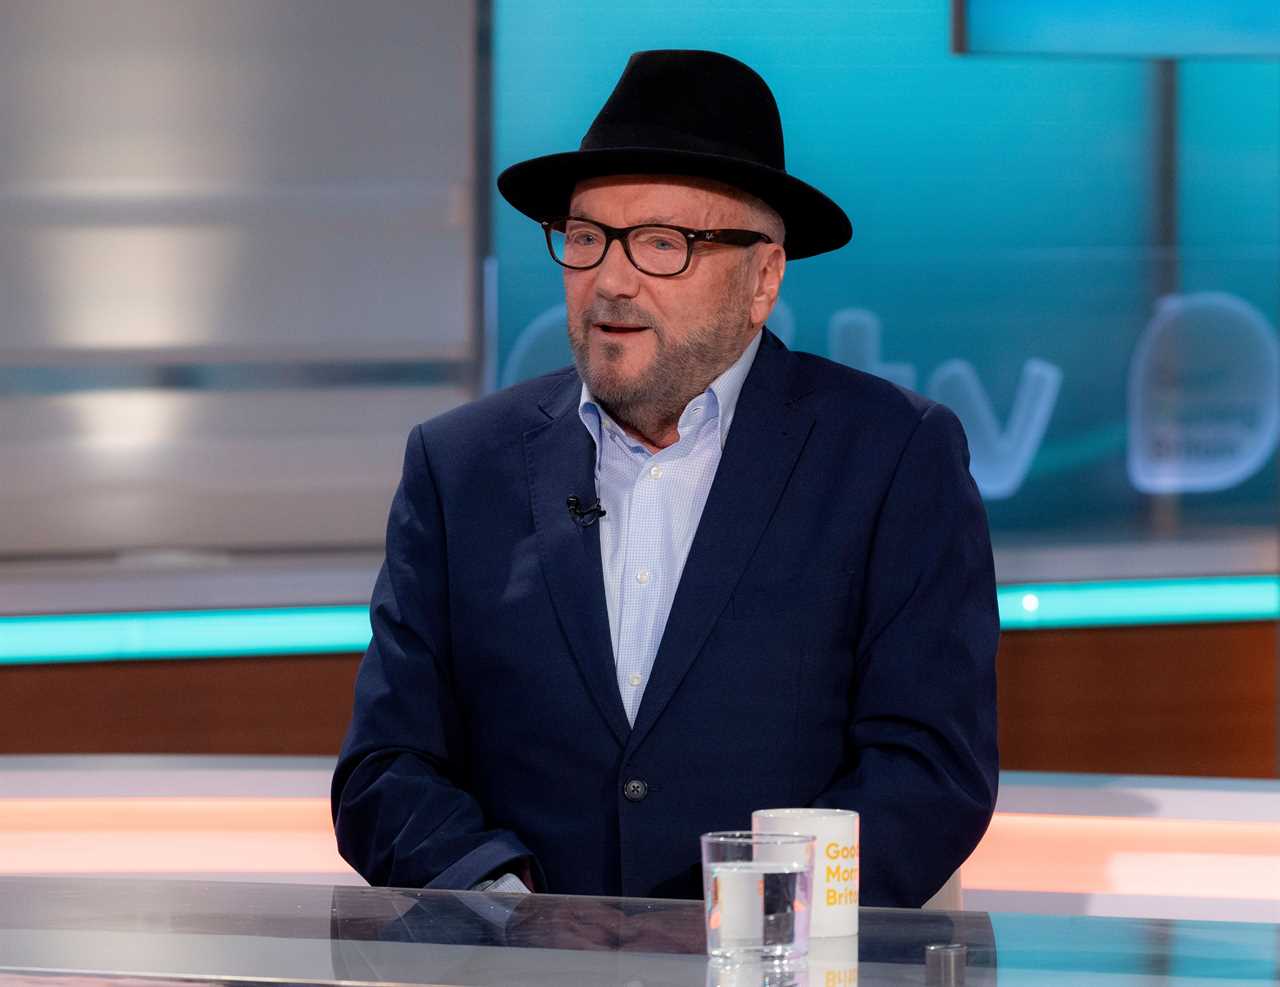 Good Morning Britain Fans Slam Susanna Reid After Interview with MP George Galloway